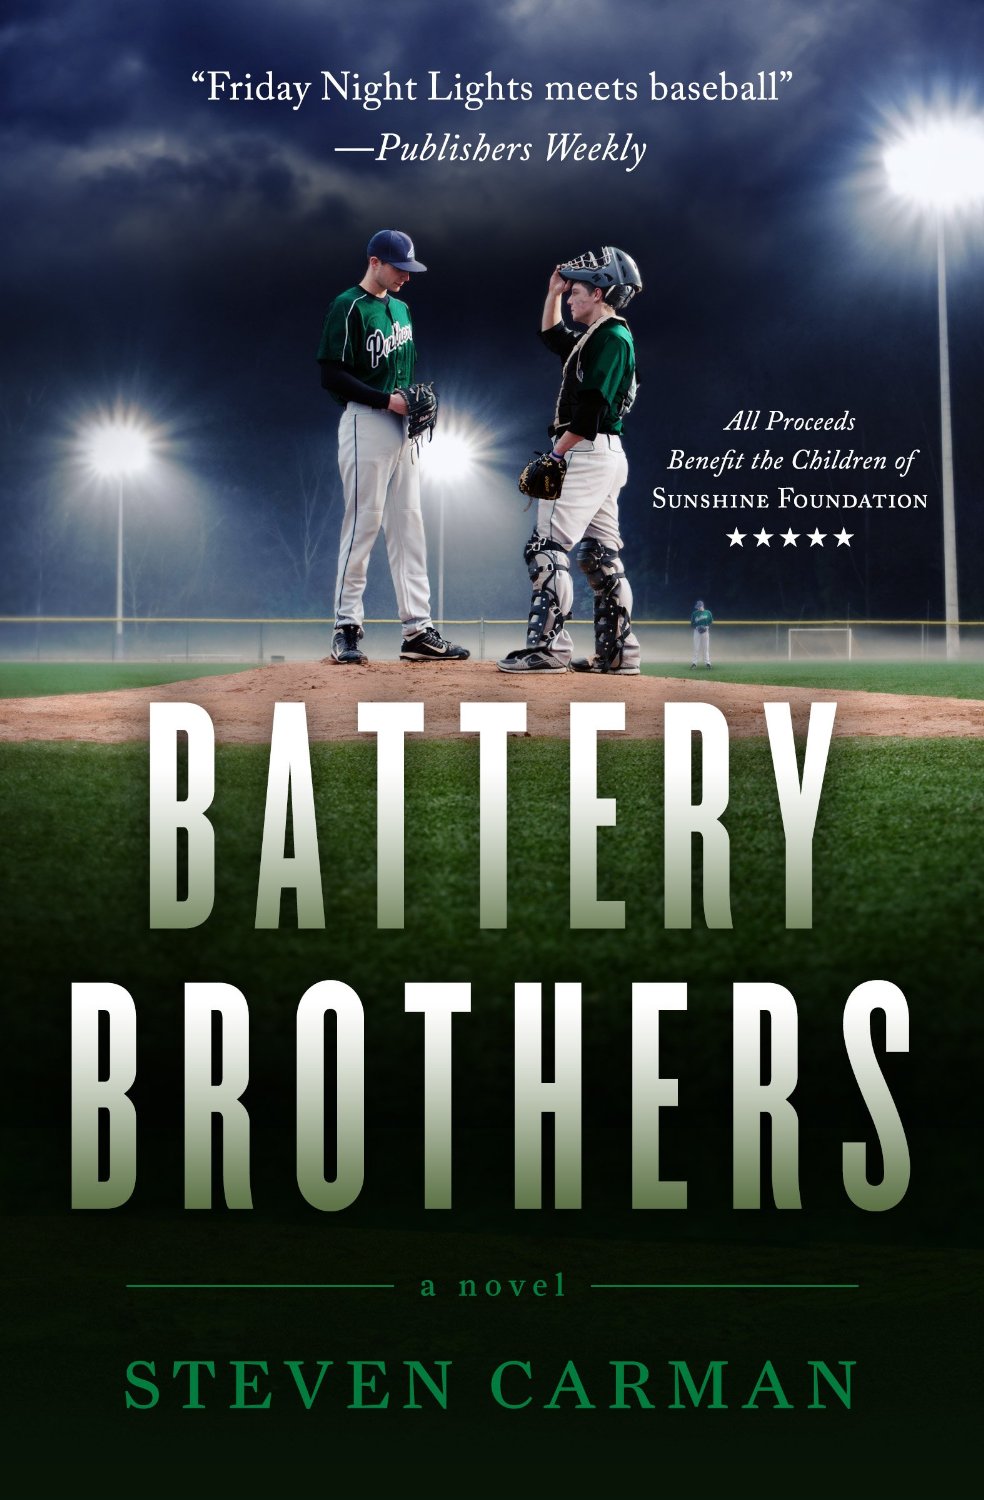 Battery Brothers by Steven Carman